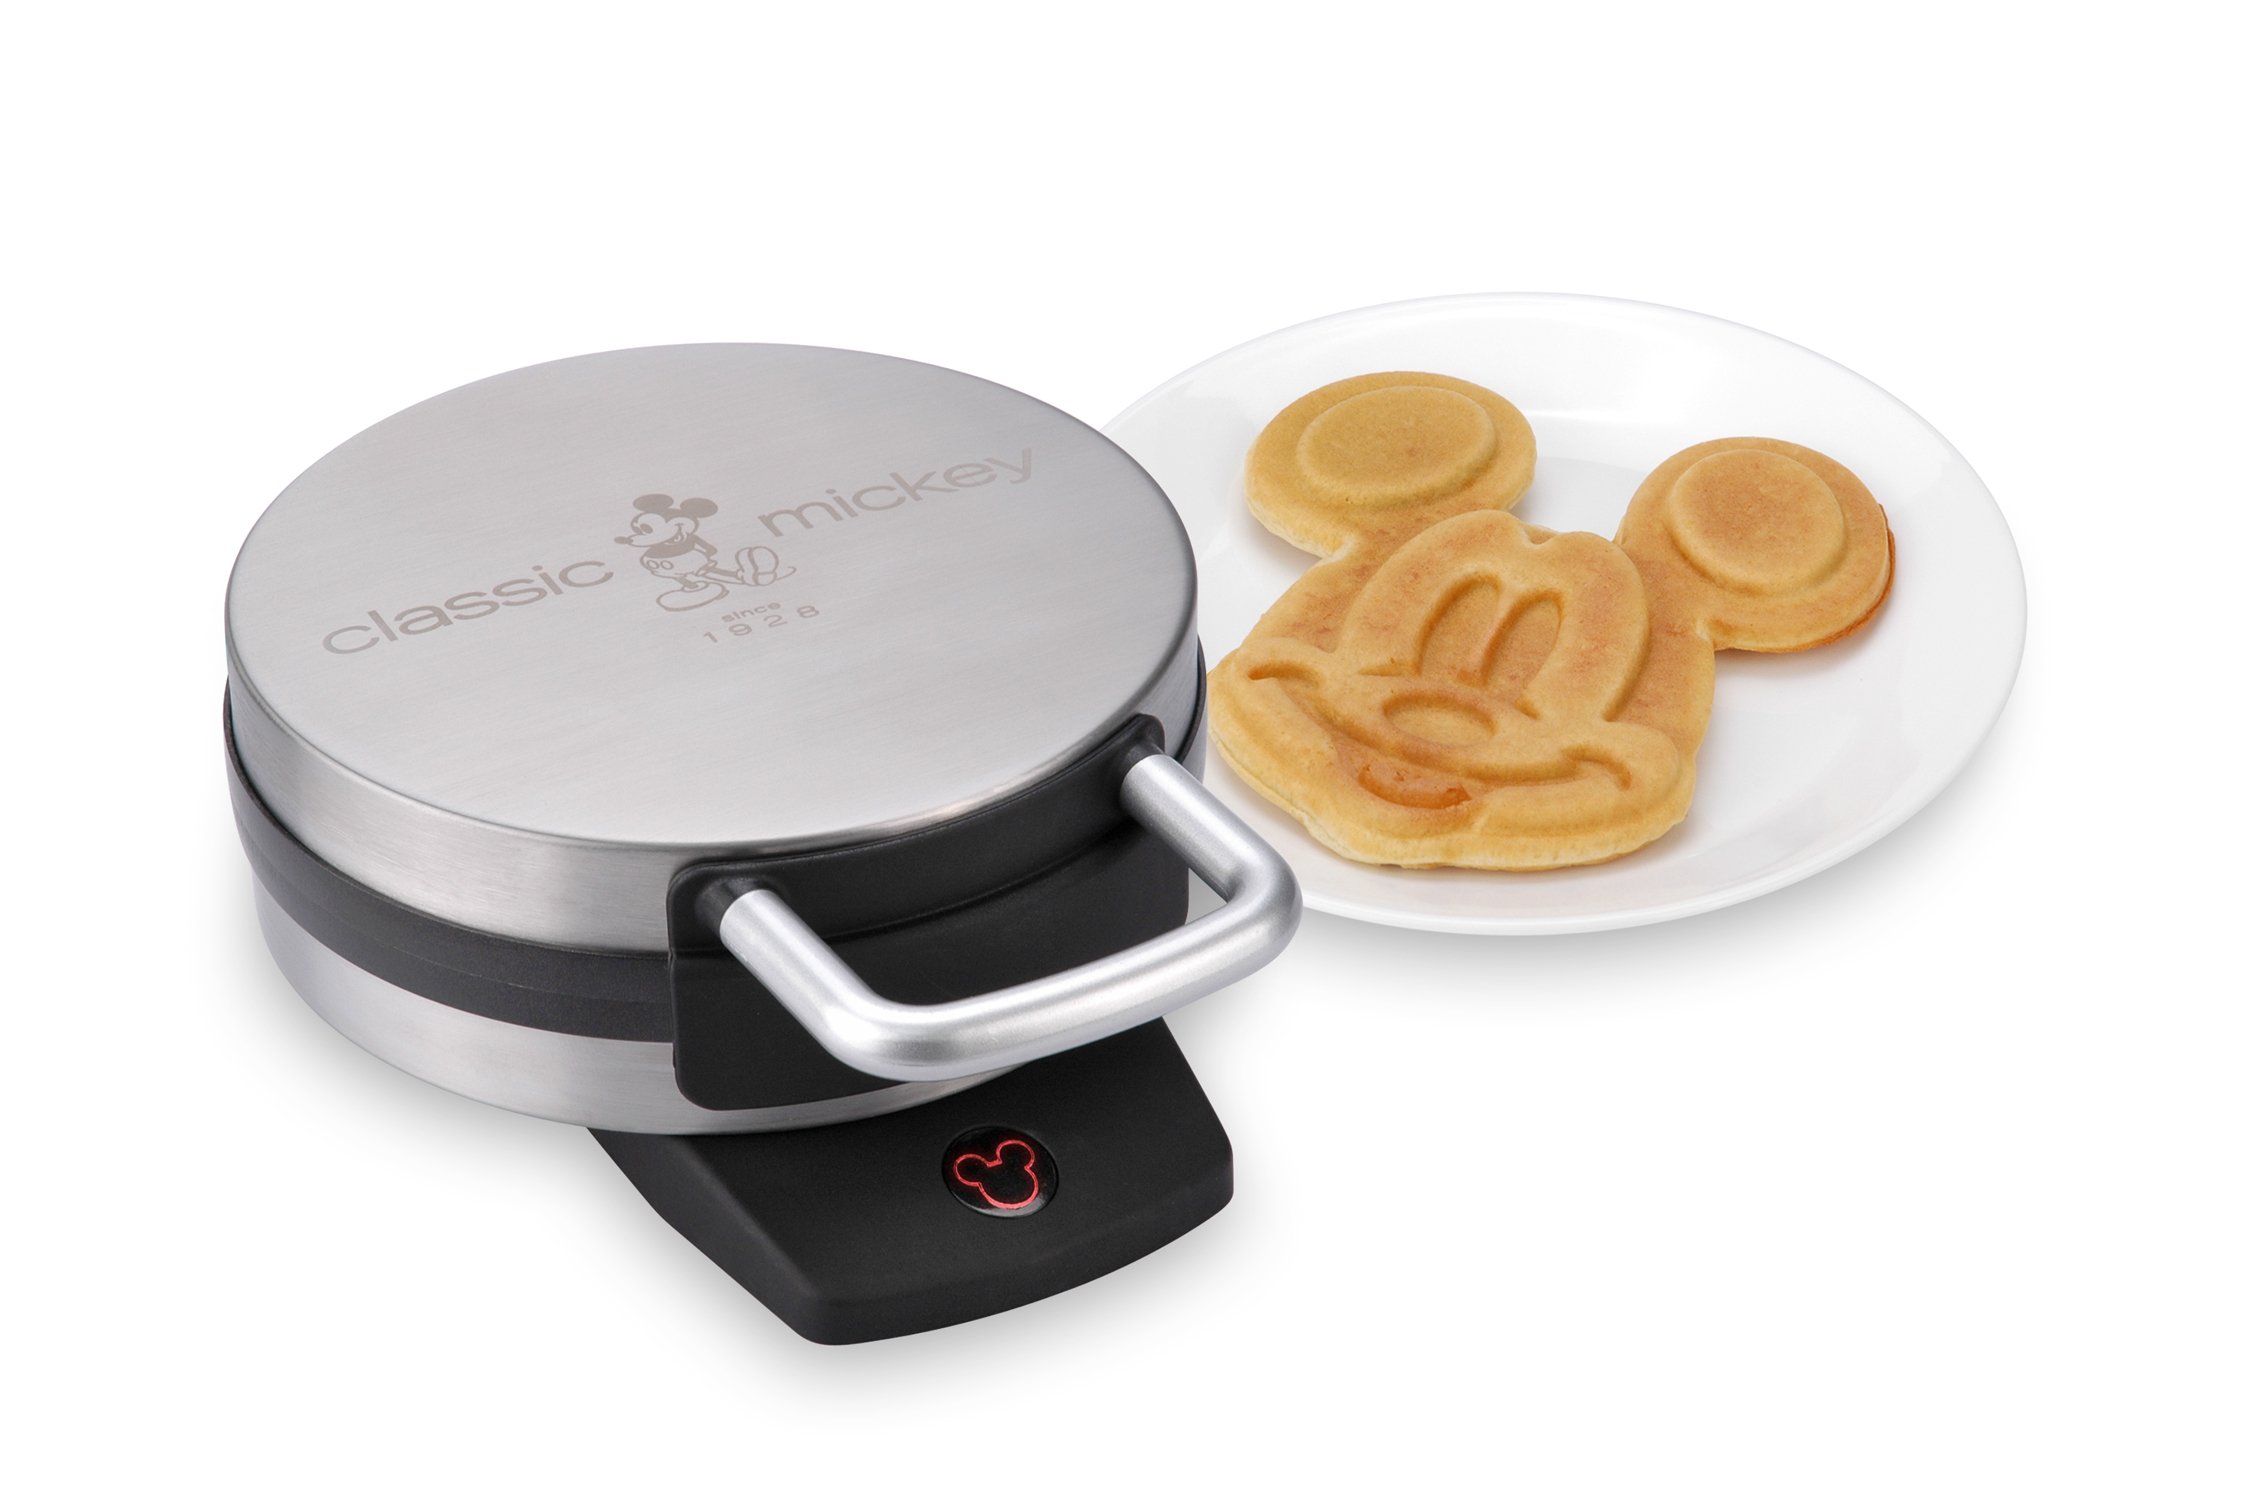 Disney Classic Mickey Waffle Maker by Select Brands - Disney Waffle Maker for Kitchen Appliances - Features Non-Stick Plates - Mickey Mouse Waffle Iron Gift for Disney Lovers - 7" Waffles